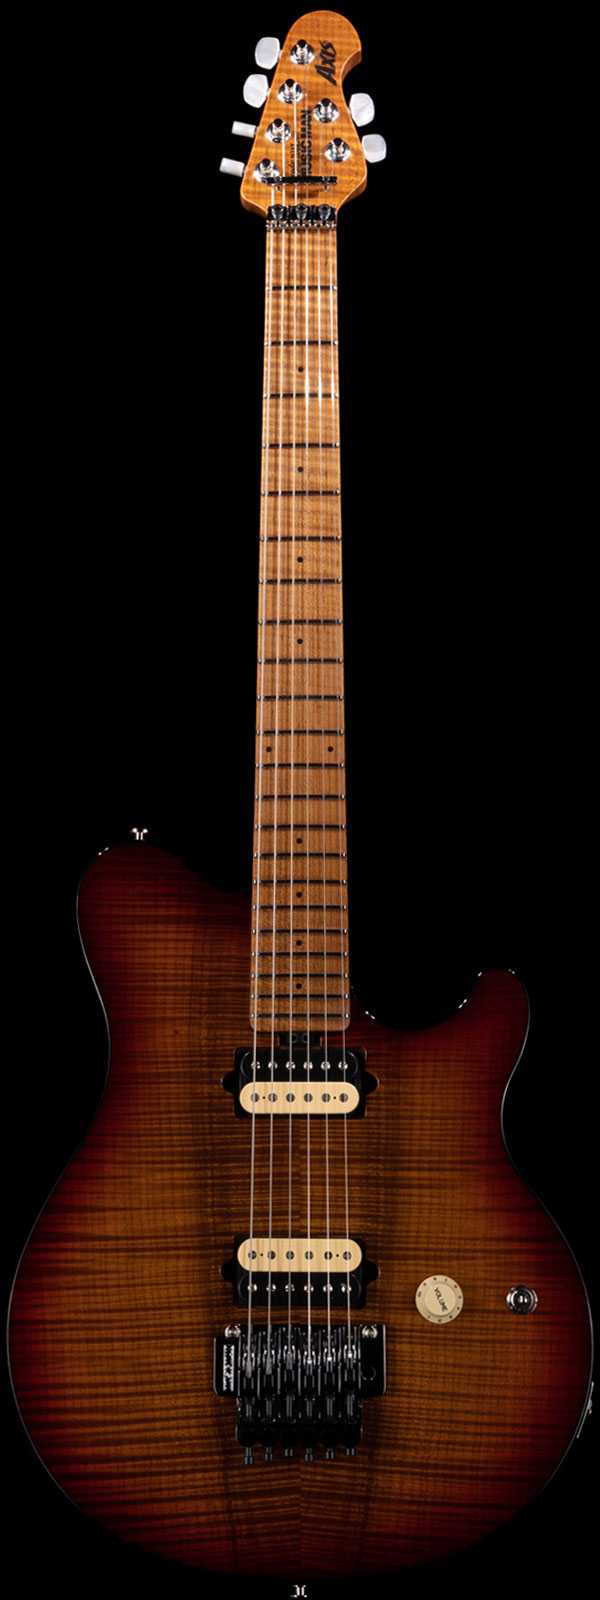 Ernie Ball Axis Roasted Flame Maple Neck Flame Maple Top Roasted Amber Flame